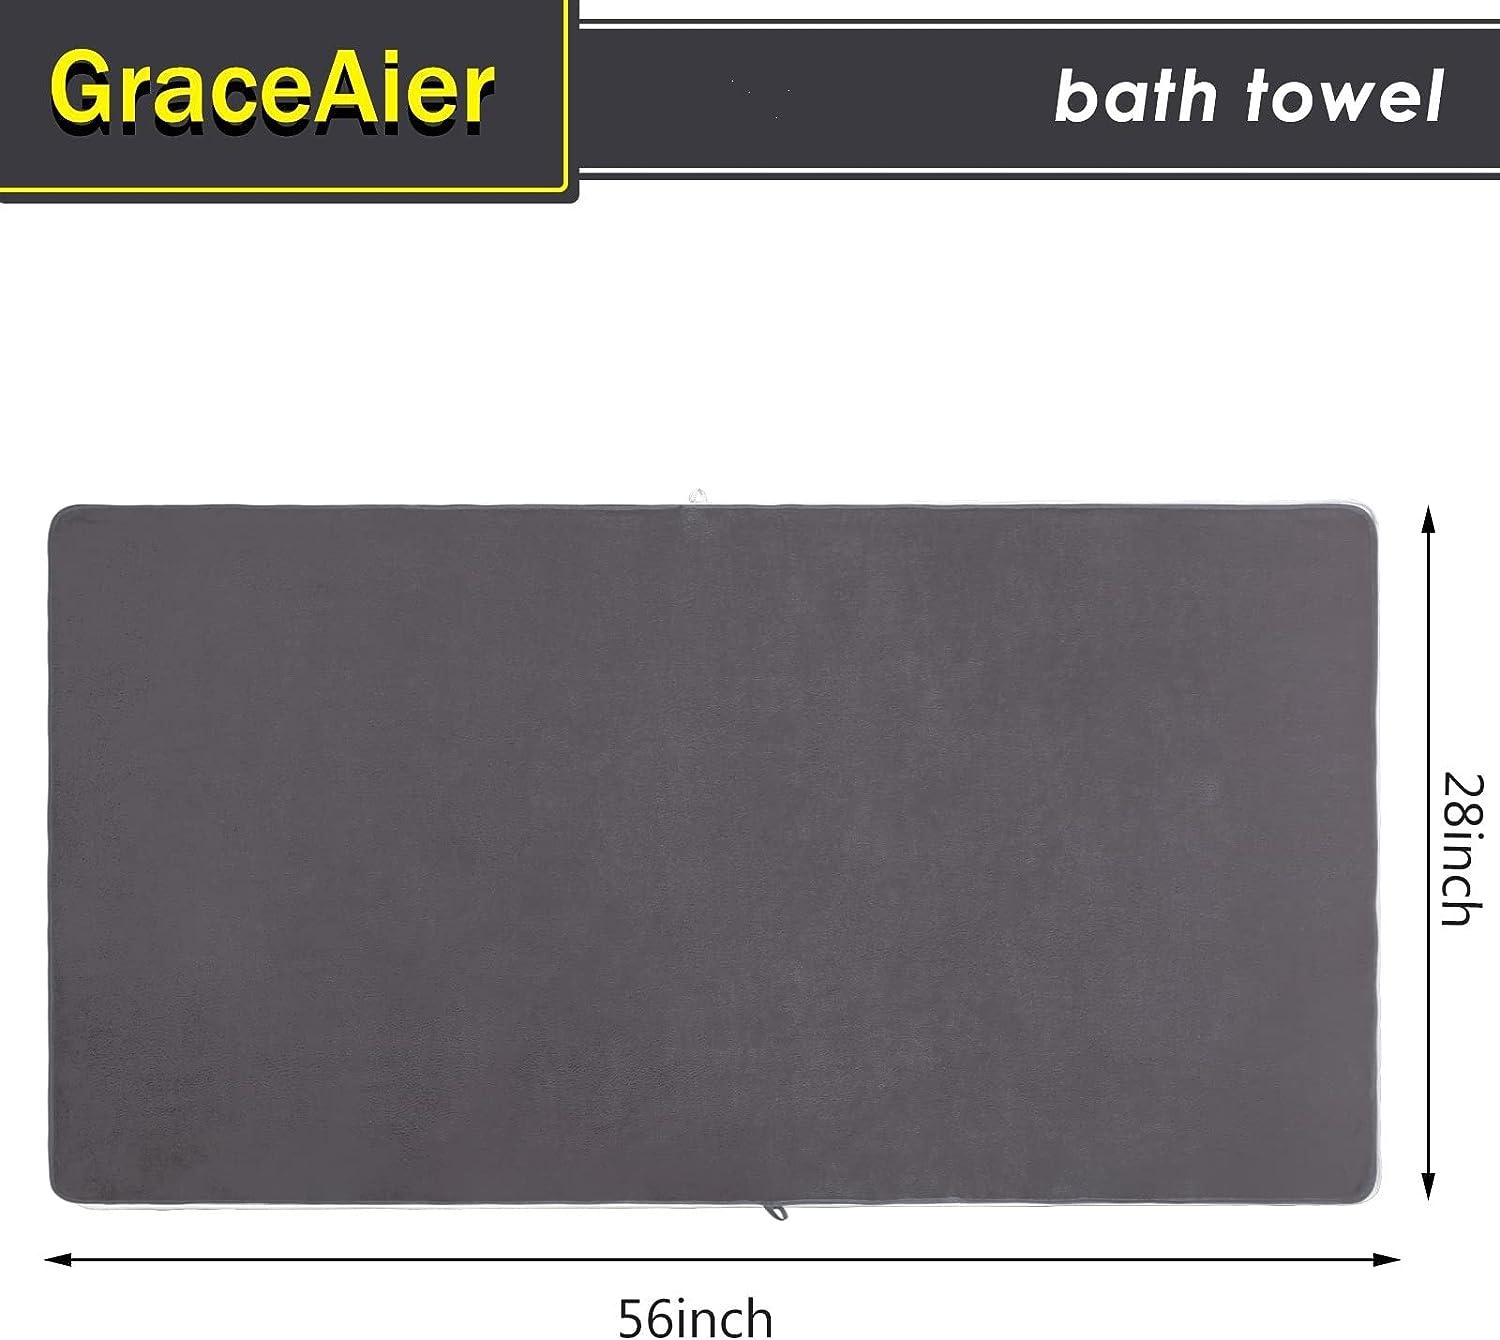 GraceAier Ultra Soft Bath Towels 4 Pack (28 x 56) - Quick Drying - -  Microfiber Coral Velvet Highly Absorbent Towel for Bath Fitness, Bathroom,  Sports, Yoga, Travel Microfiber-grey 28 x 56